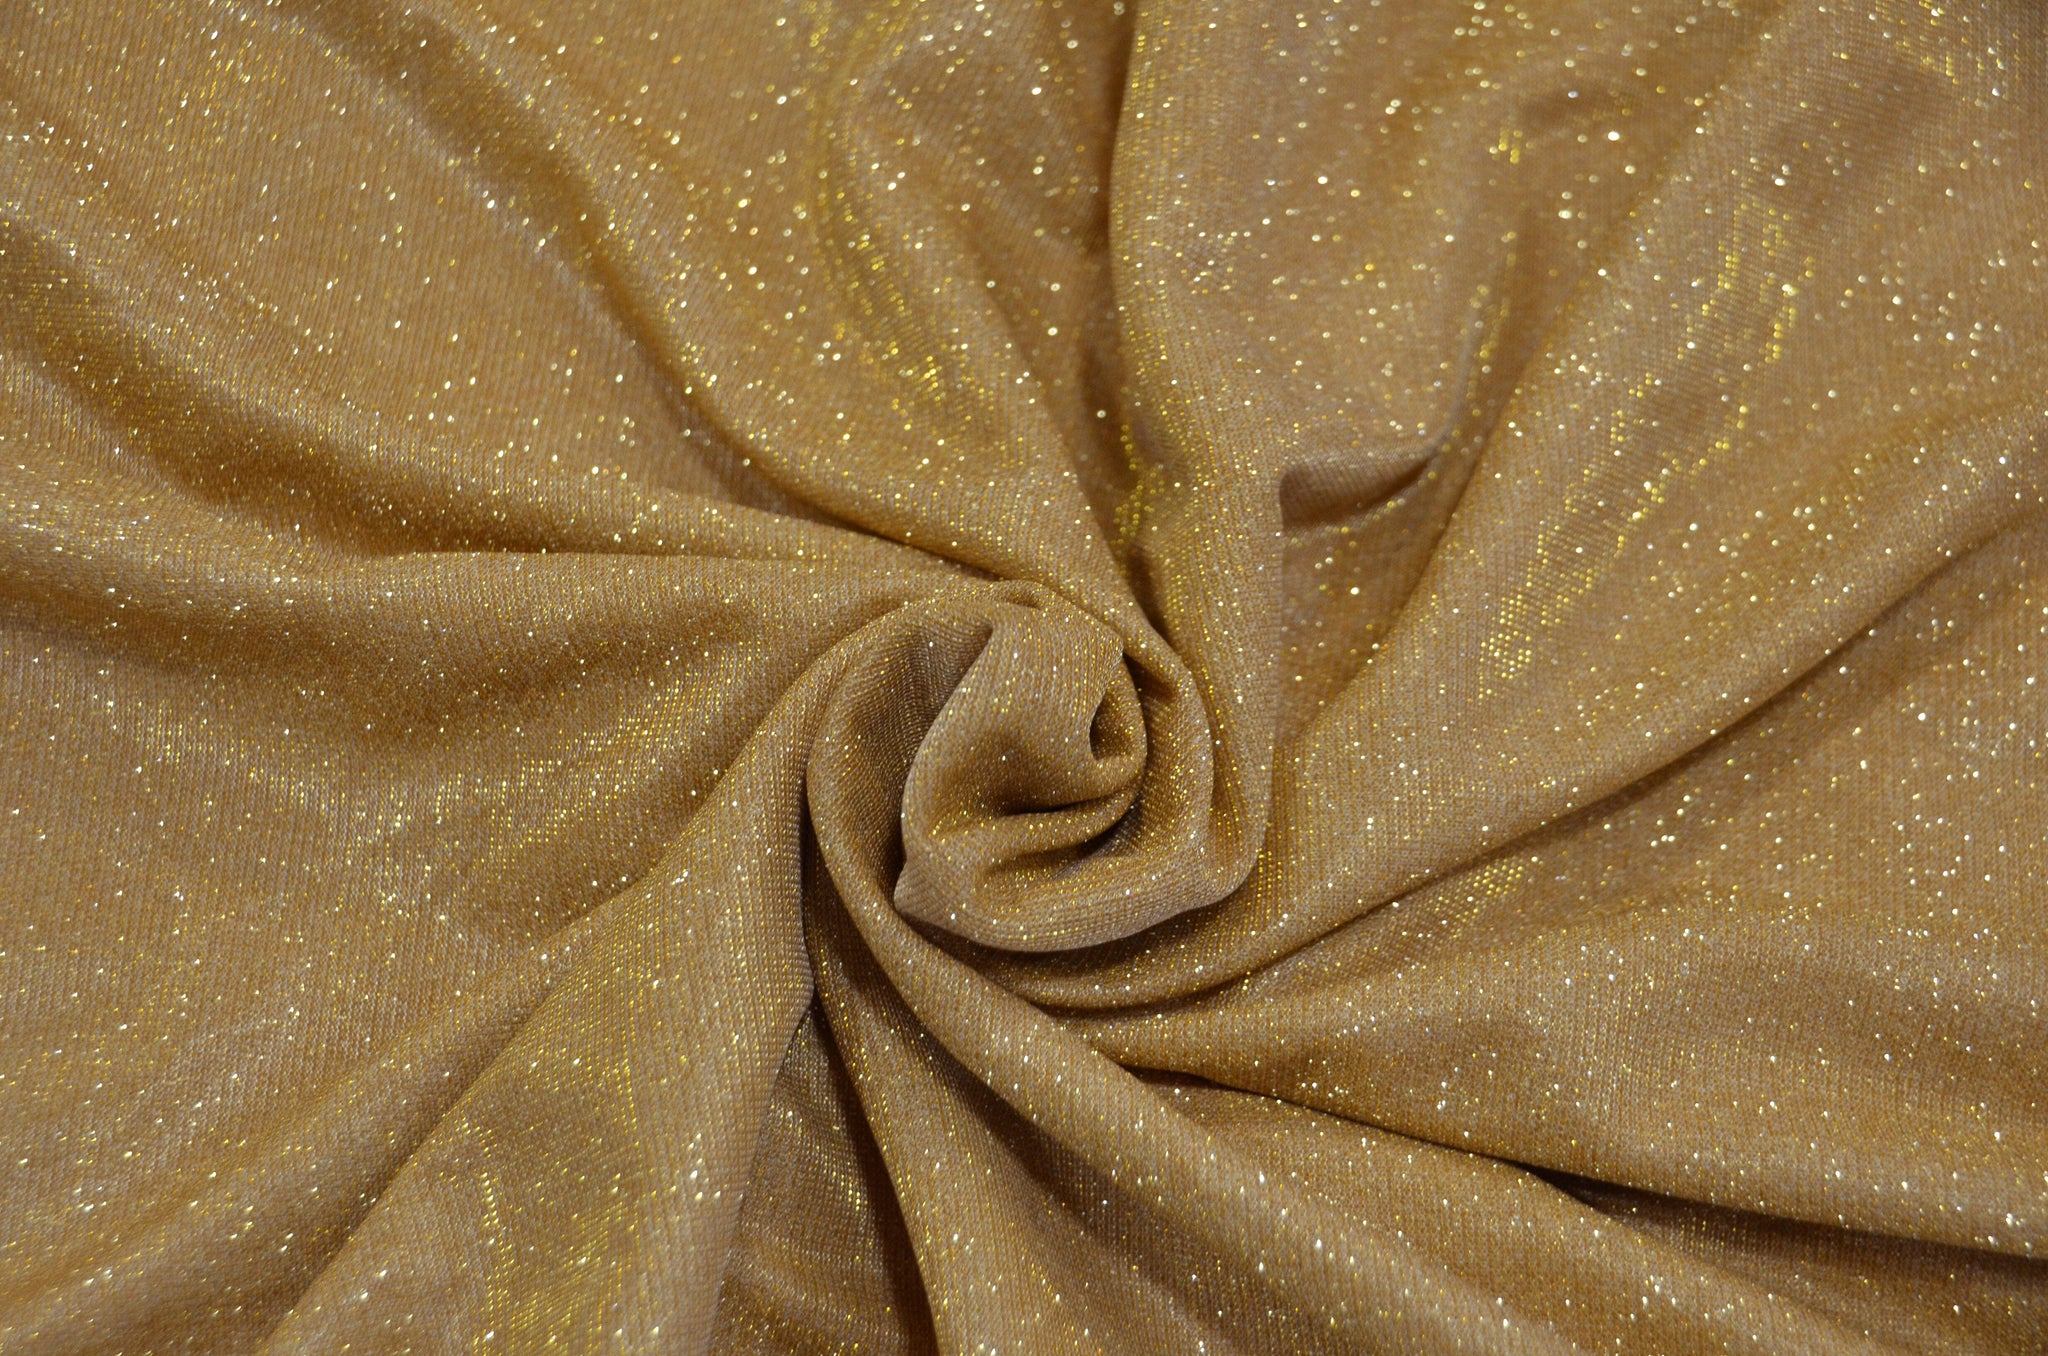 Polyester Spandex Camel Gold Lurex Textured Fabric by The Yard